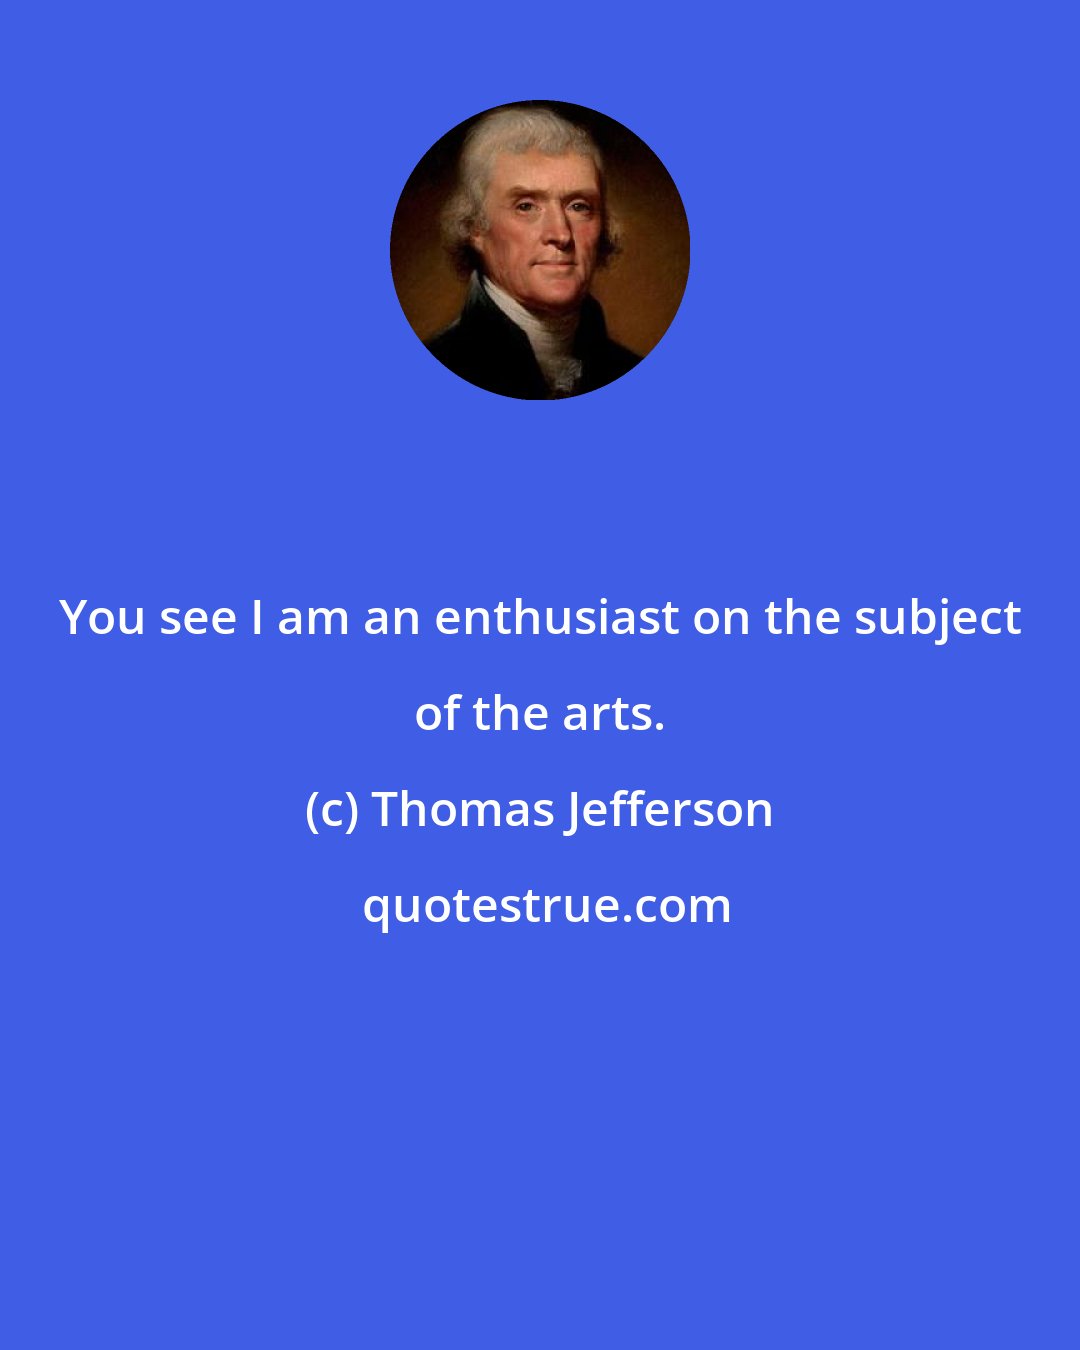 Thomas Jefferson: You see I am an enthusiast on the subject of the arts.